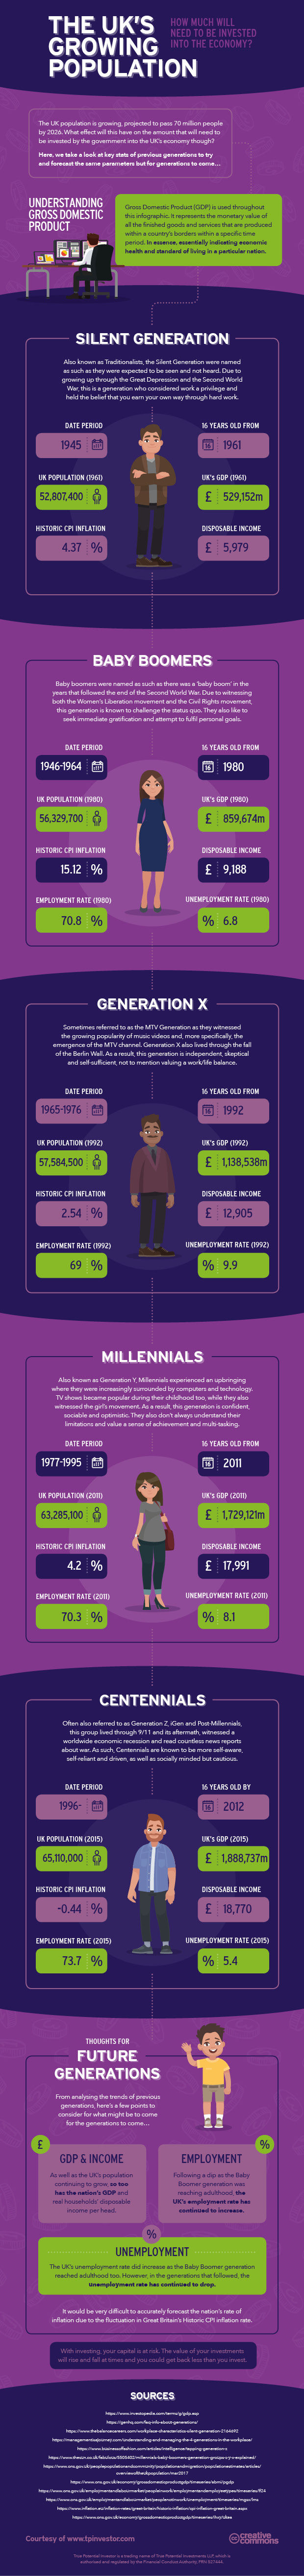 The UK Growing Population - Infographic